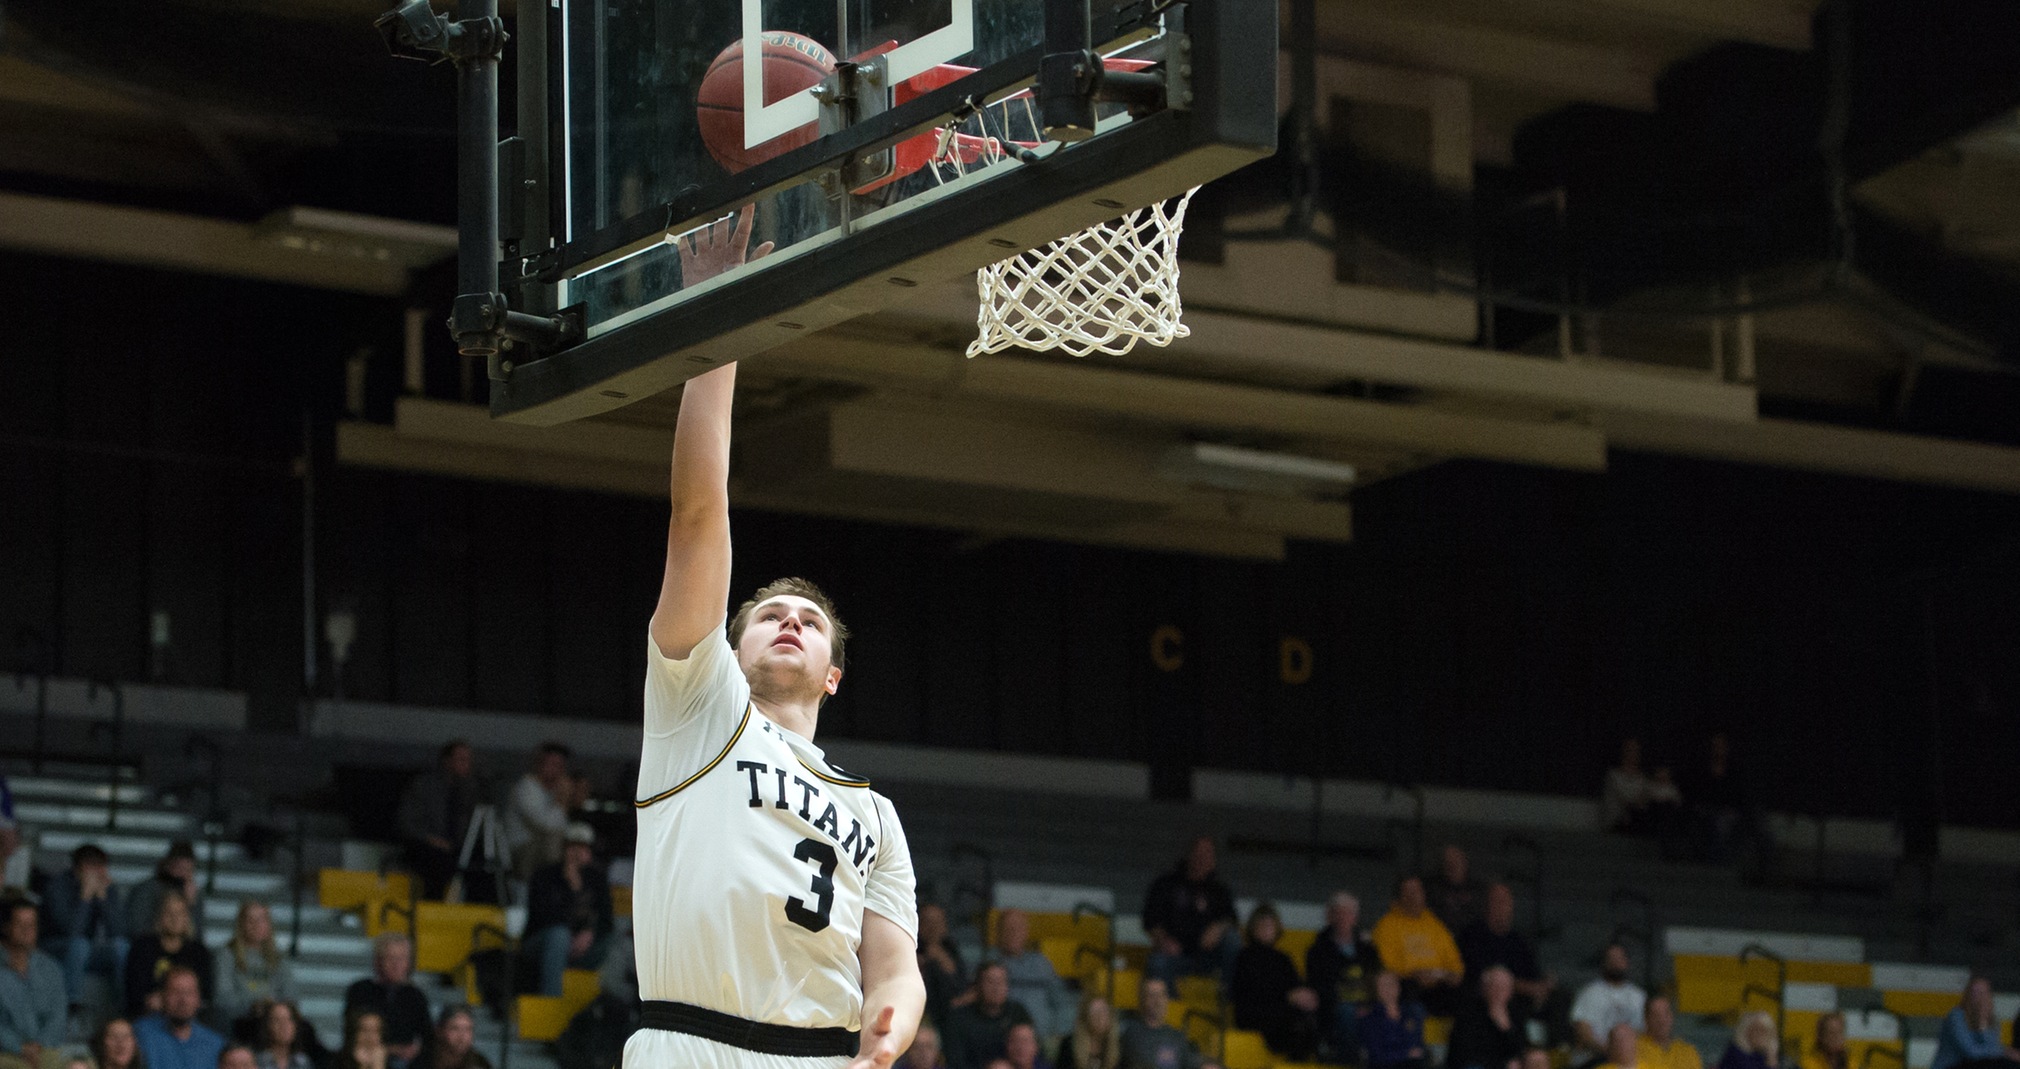 David Vlotho totaled eight points and six rebounds during the Titans' win over league-leading UW-Stevens Point.